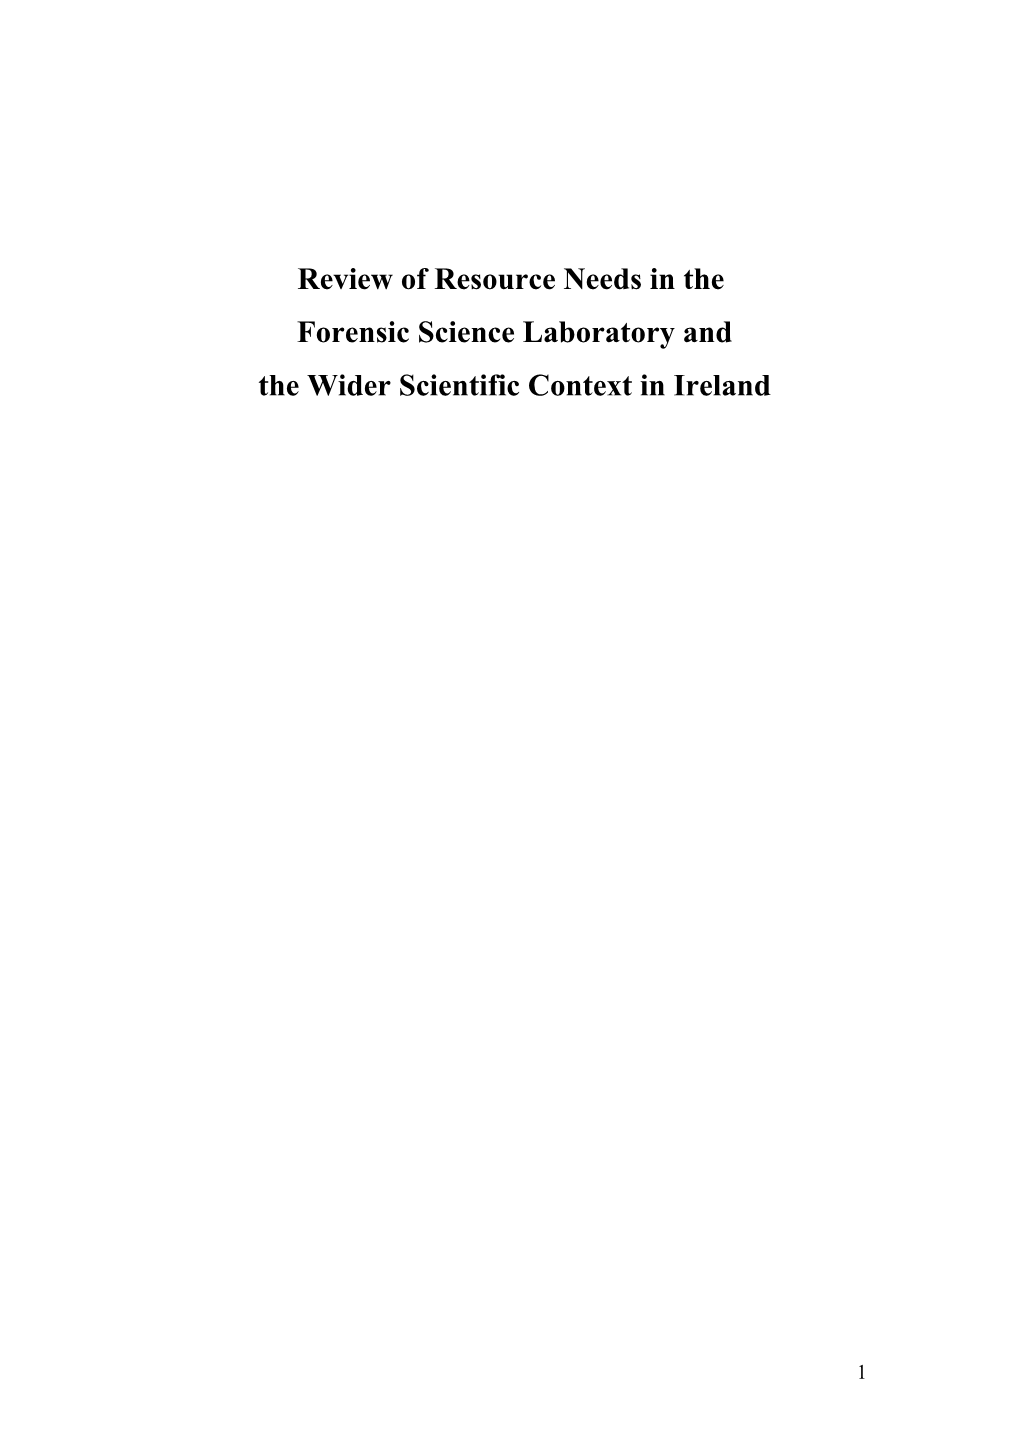 Review of Resource Needs in the Forensic Science Laboratory